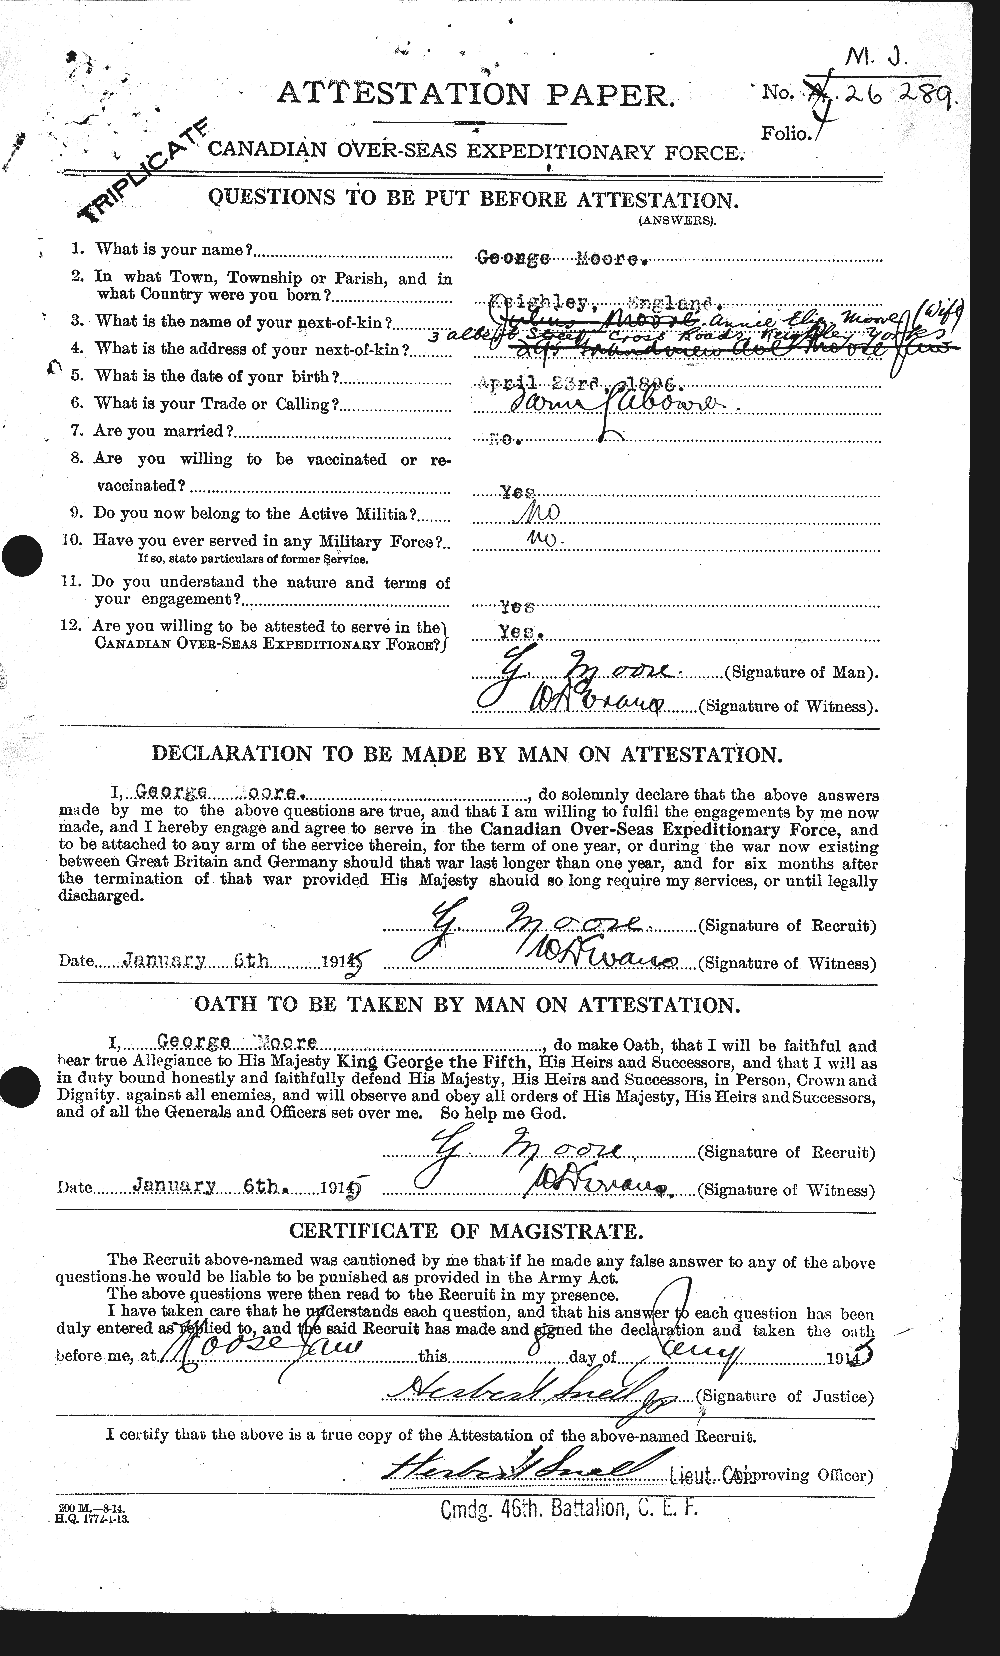 Personnel Records of the First World War - CEF 509412a